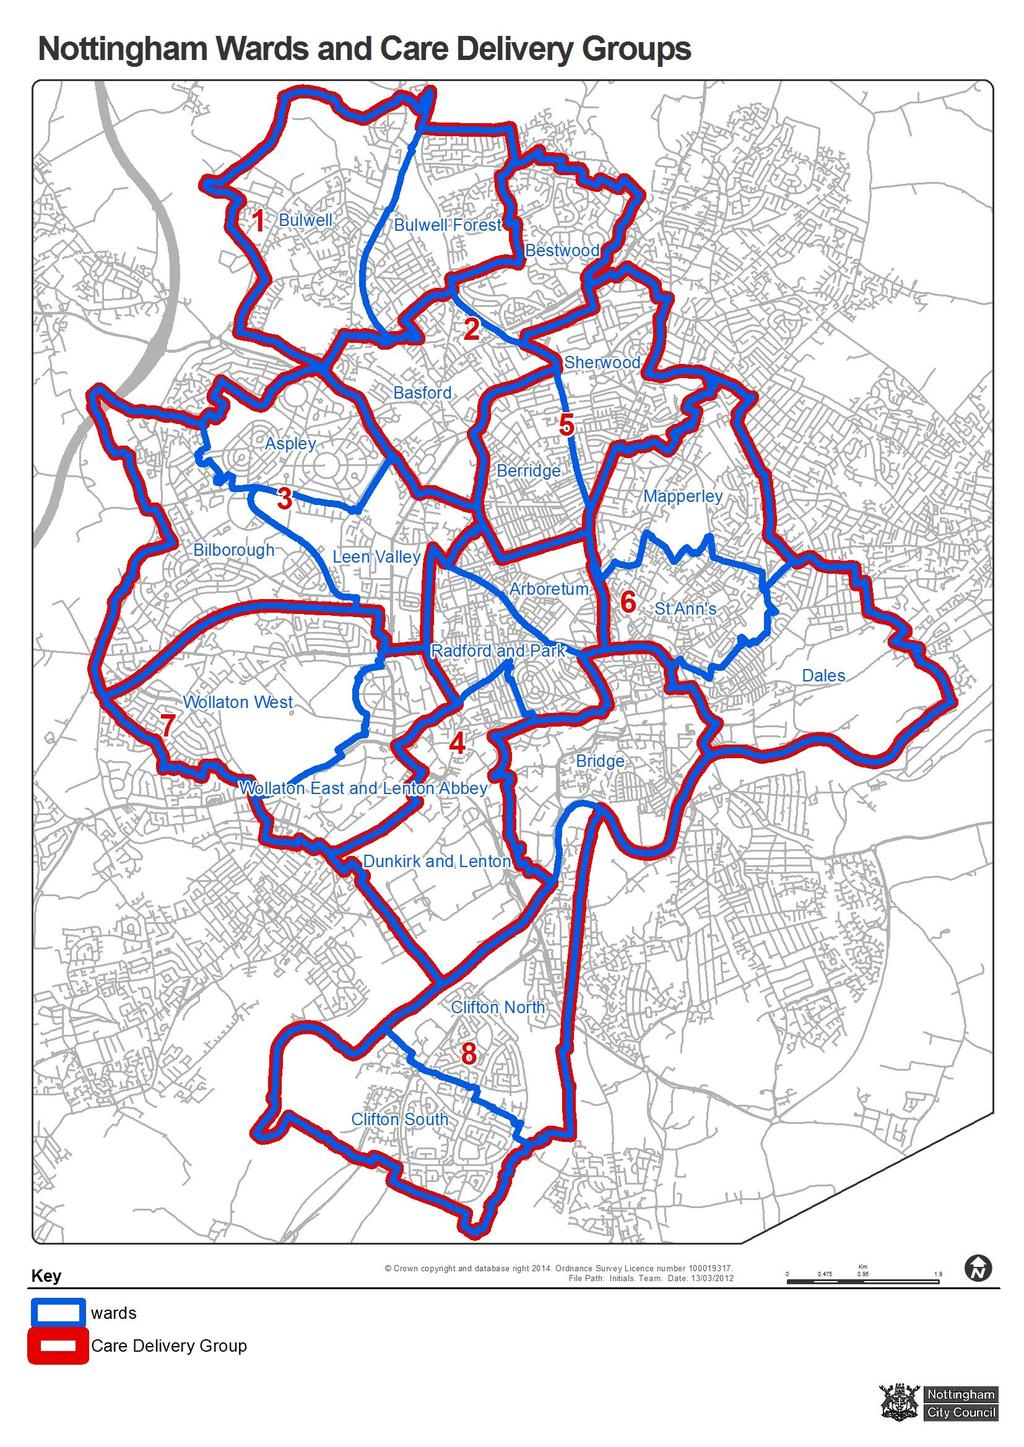 Appendix 1: Ward and Care Delivery Group Areas